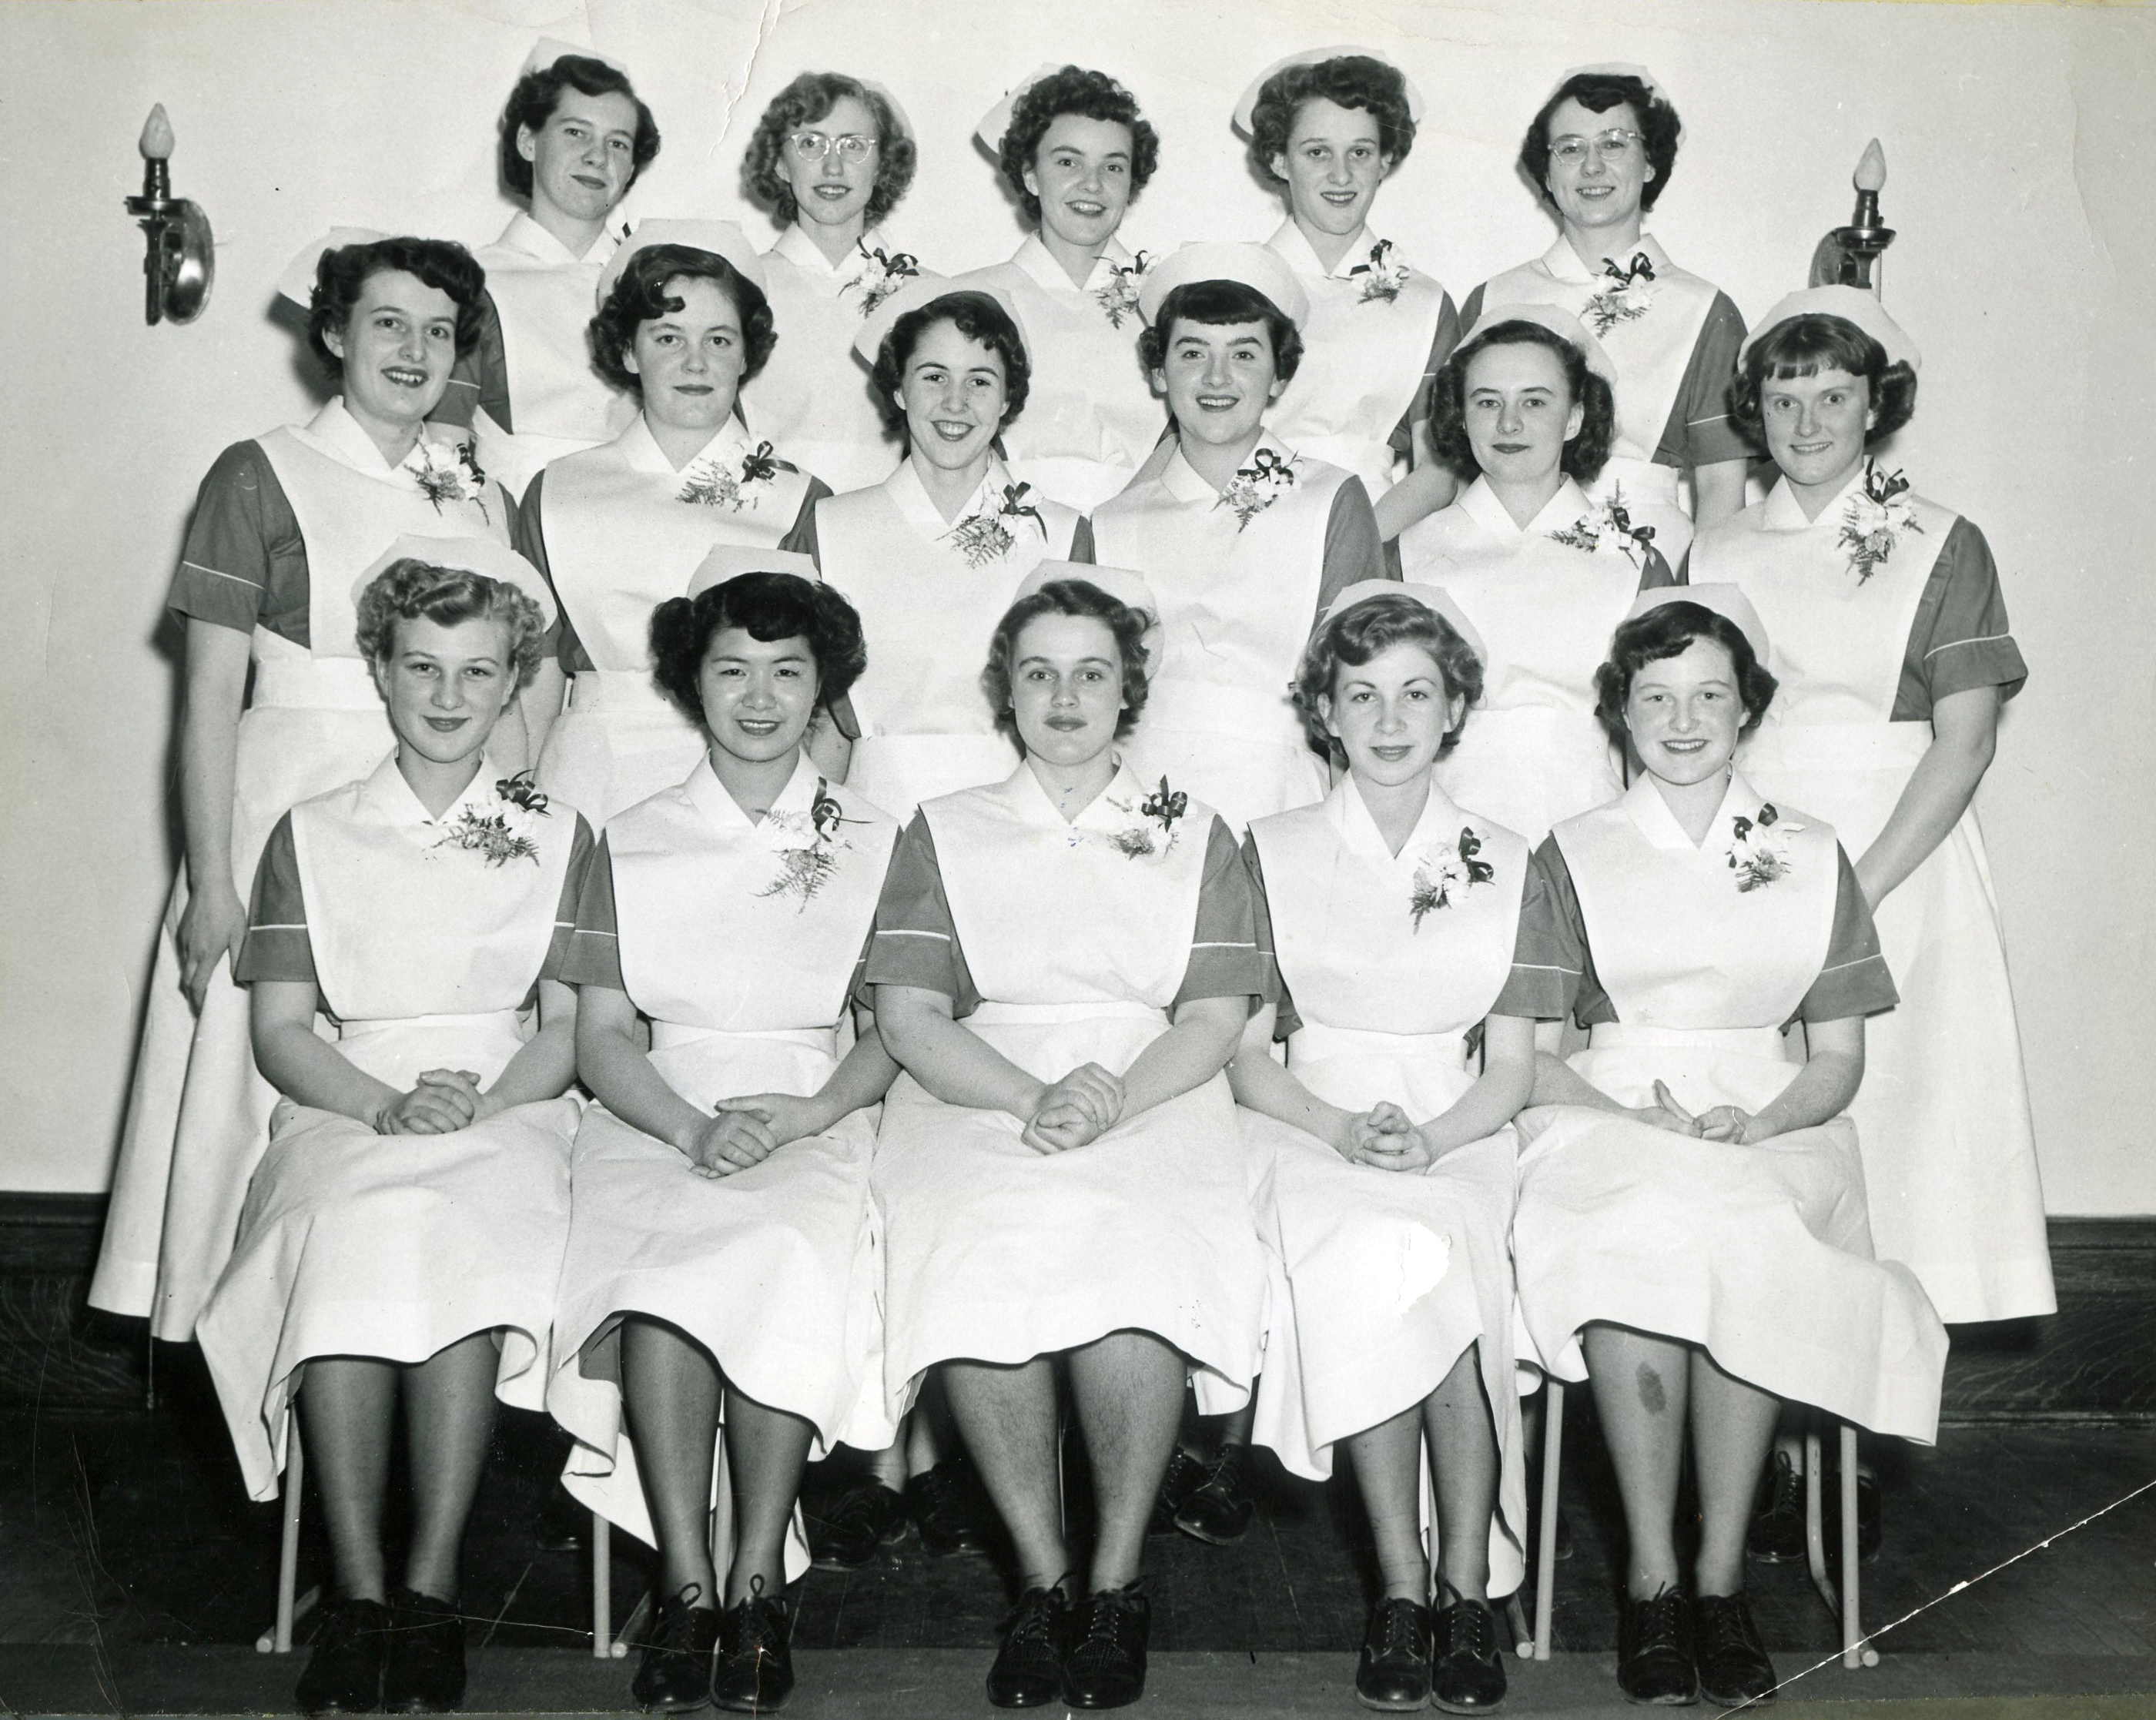 16 smiling women in nurses' uniforms sitting and standing for a formal photo.